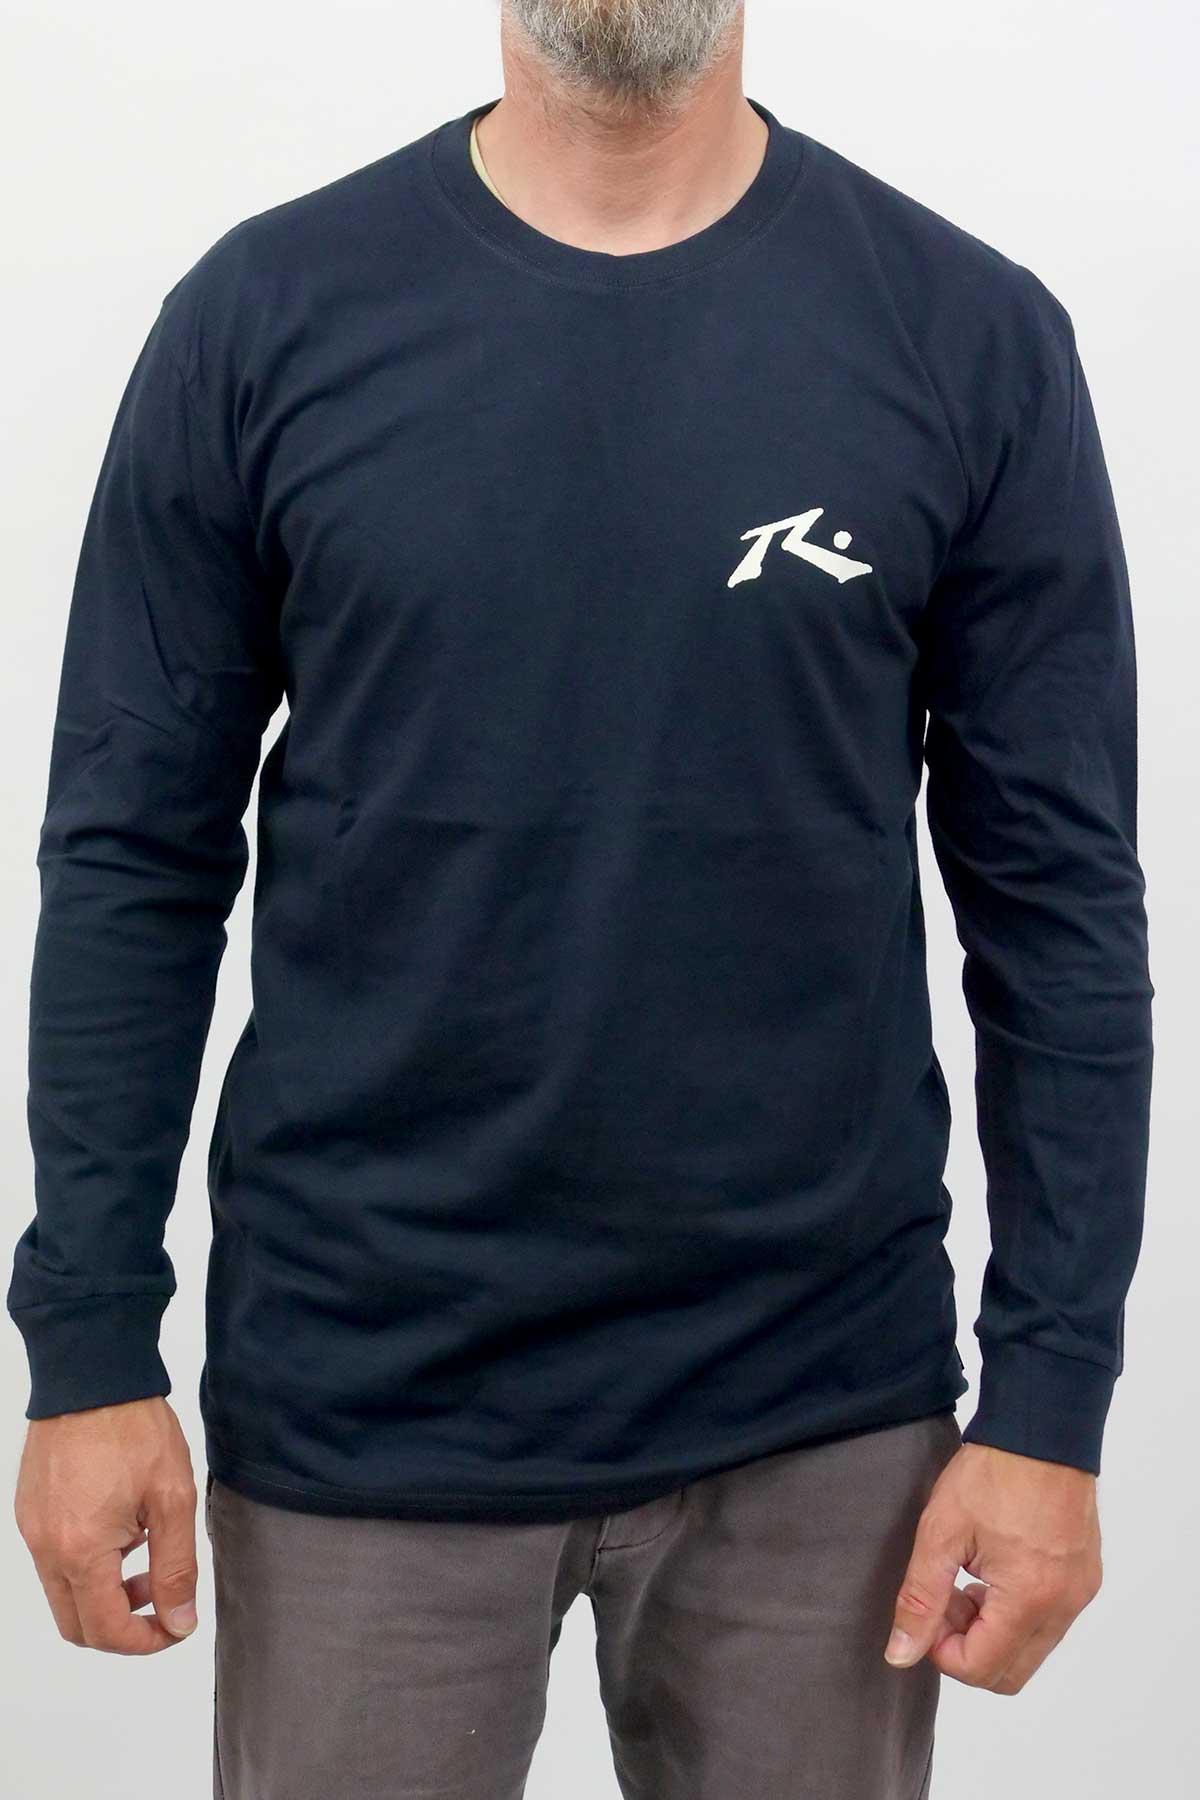 Rusty Tee - Competition LS Tshirt front navy